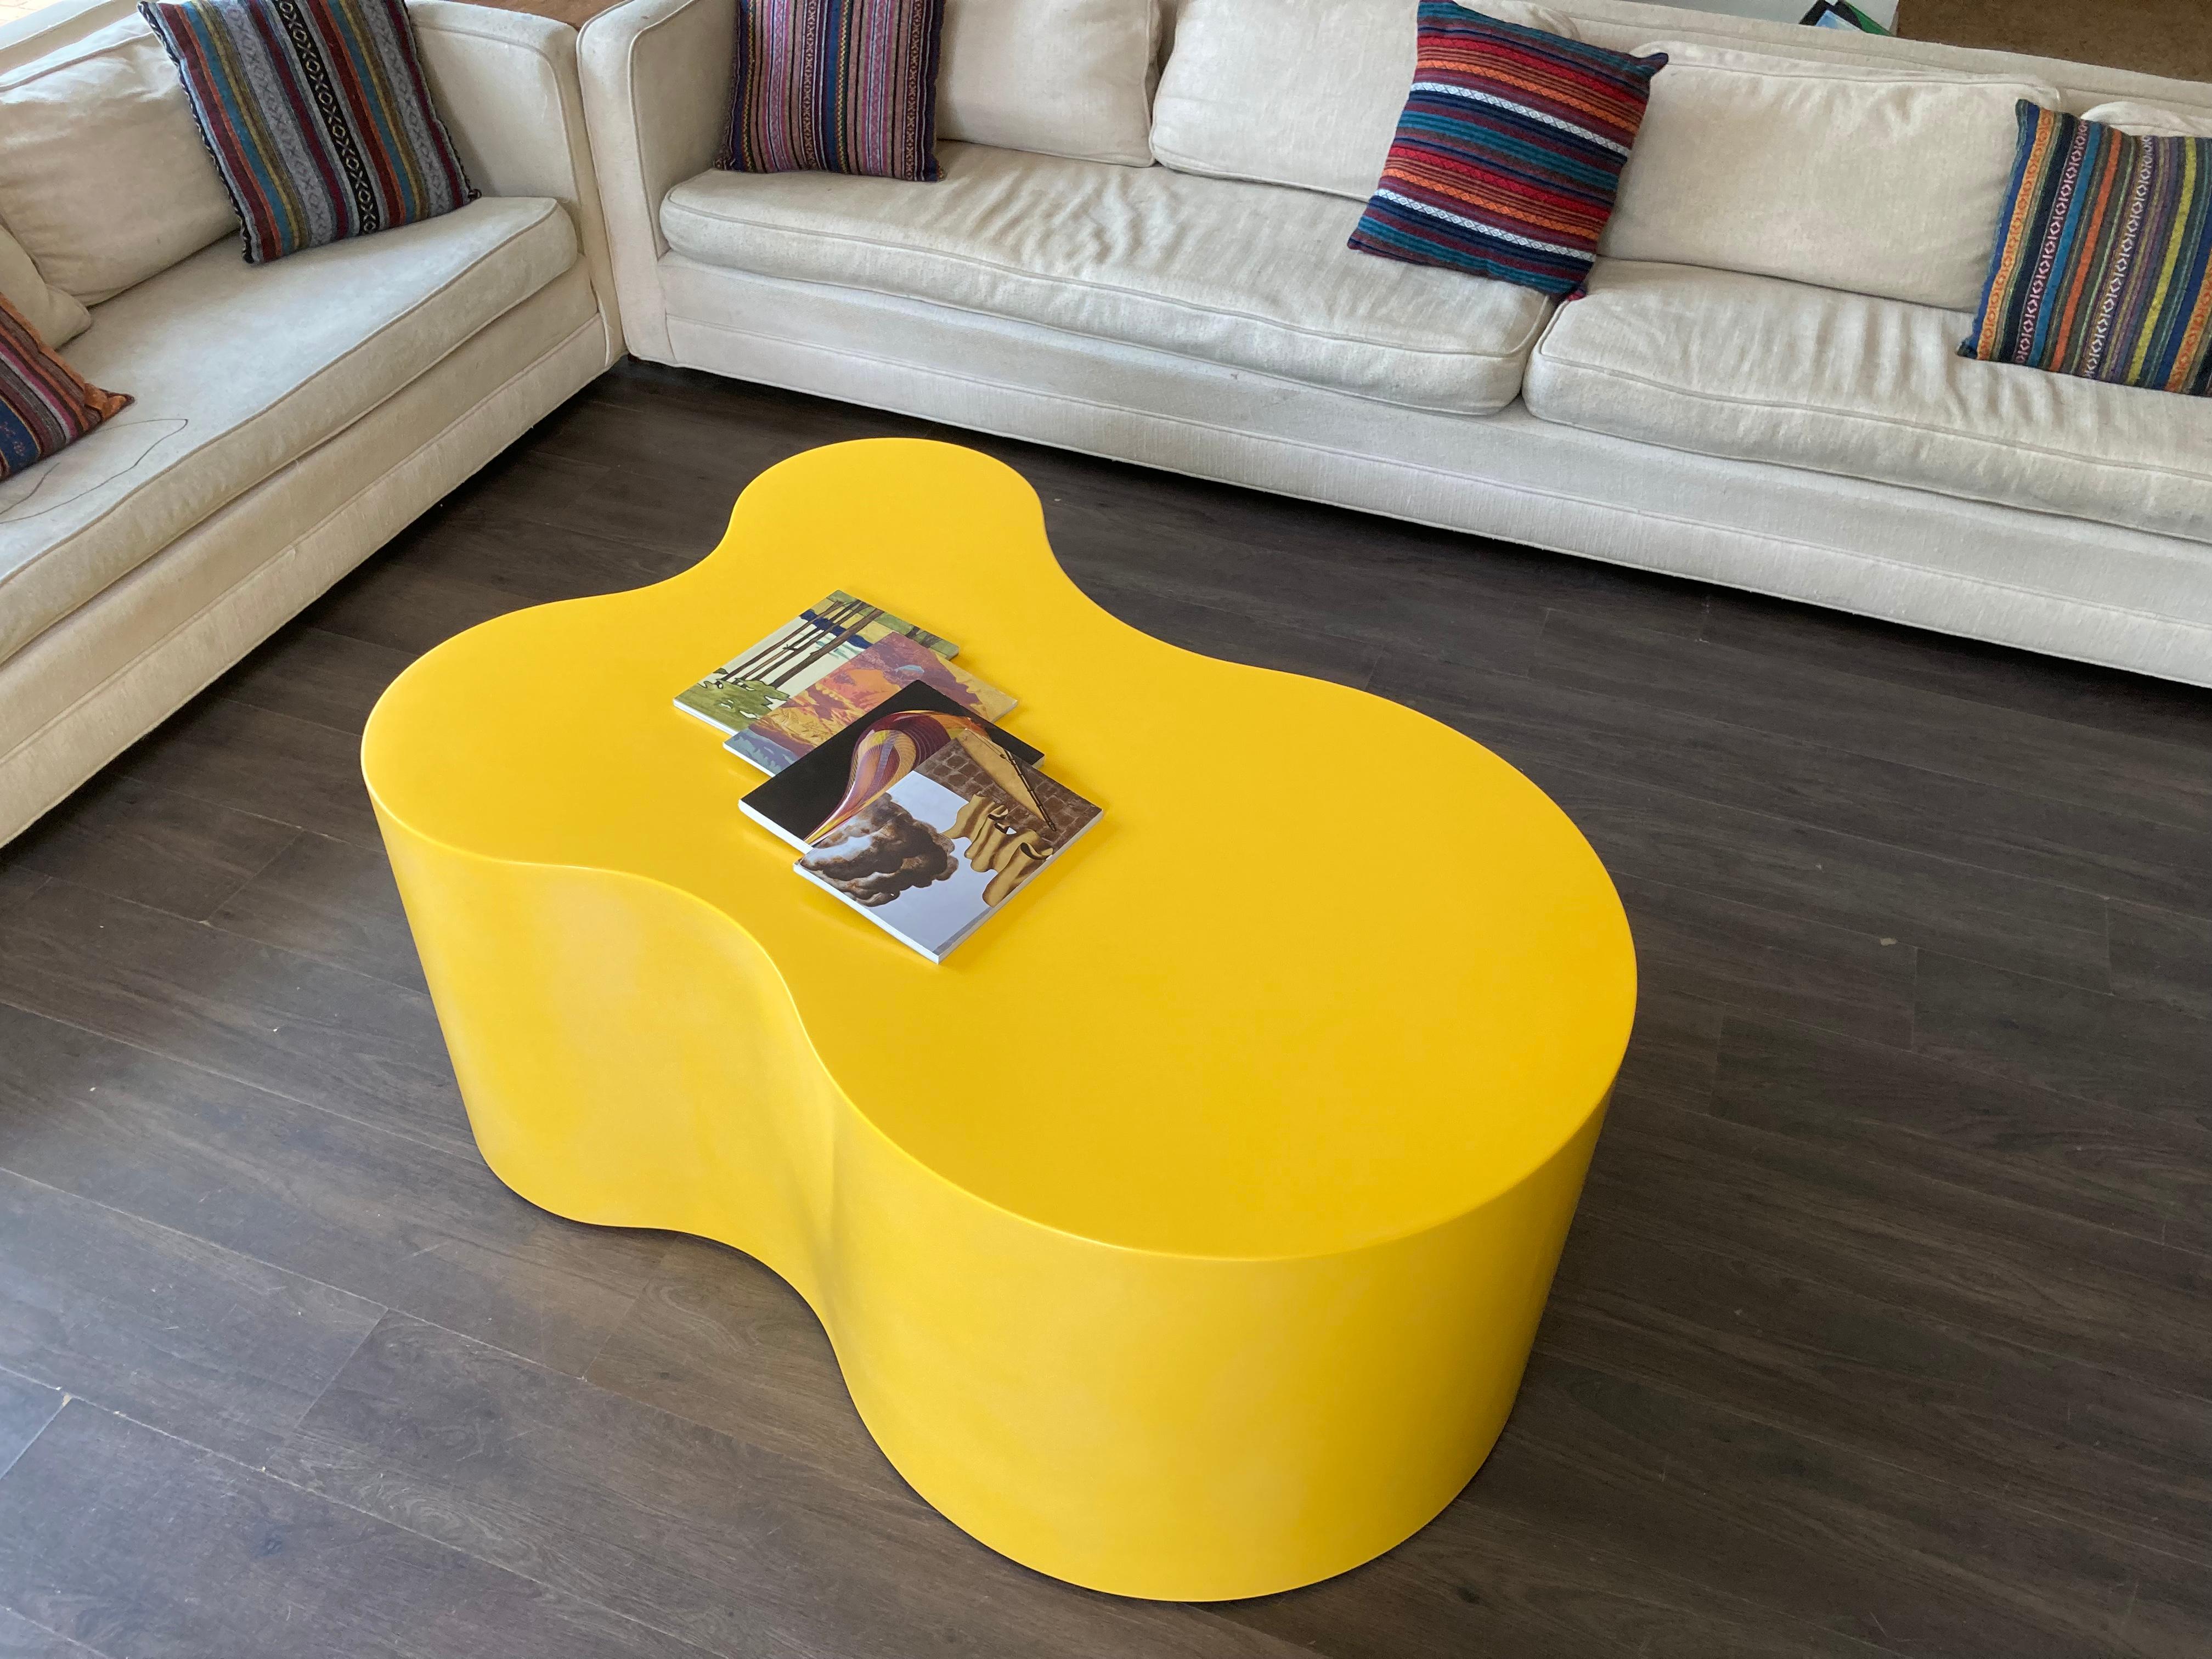 Cool Organic coffee table made of plywood and wood with a yellow paint finish. Table has four casters.